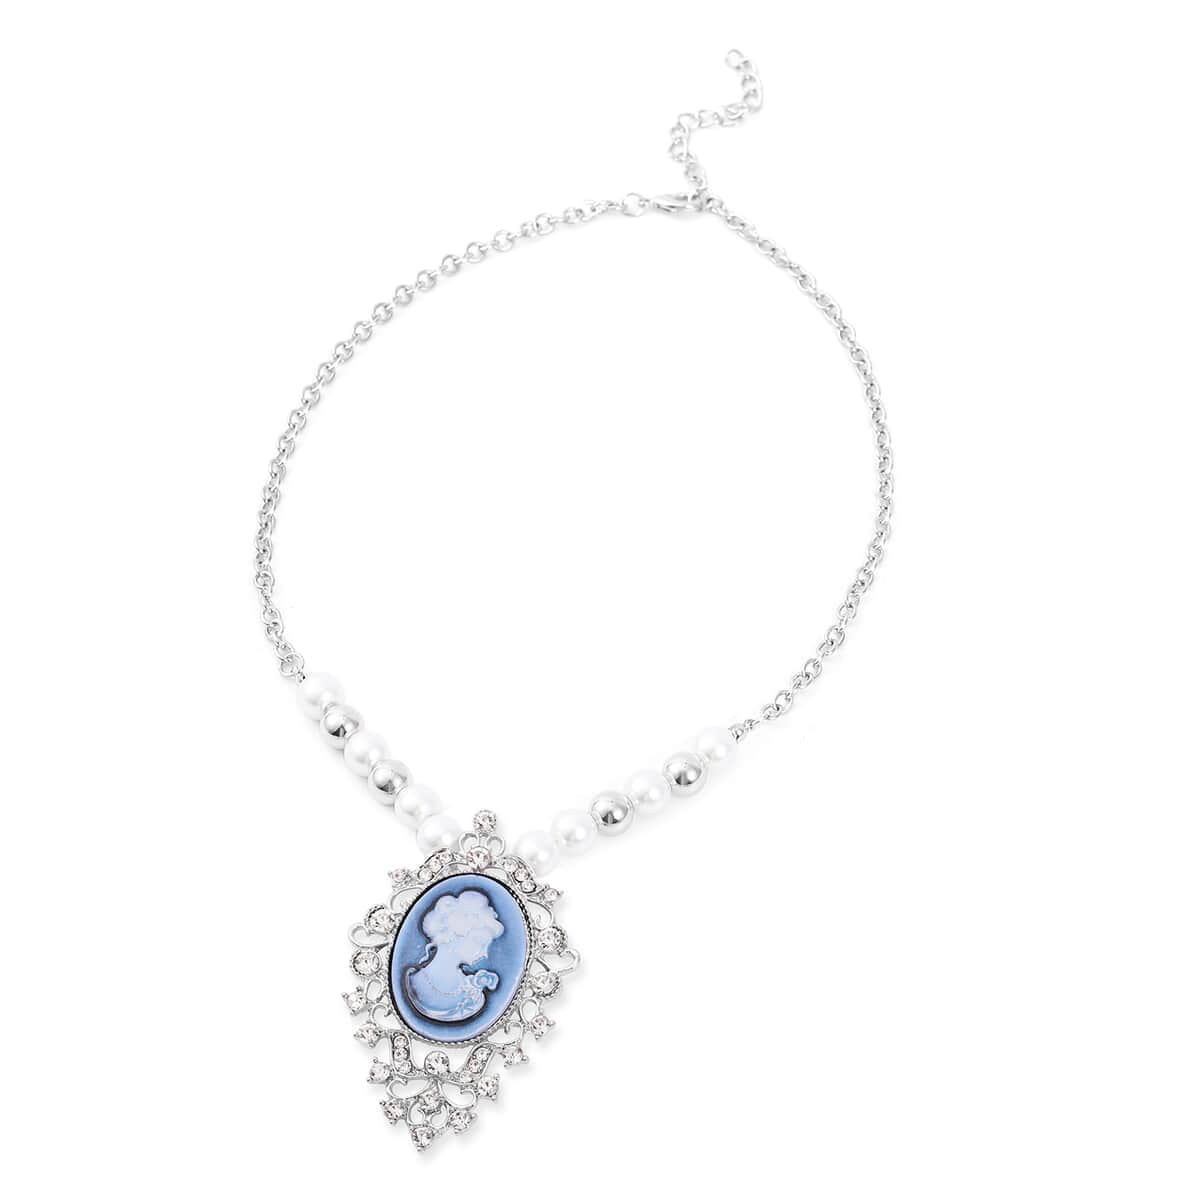 Buy Blue Cameo, Multi Gemstone Necklace (20-22 Inches) and